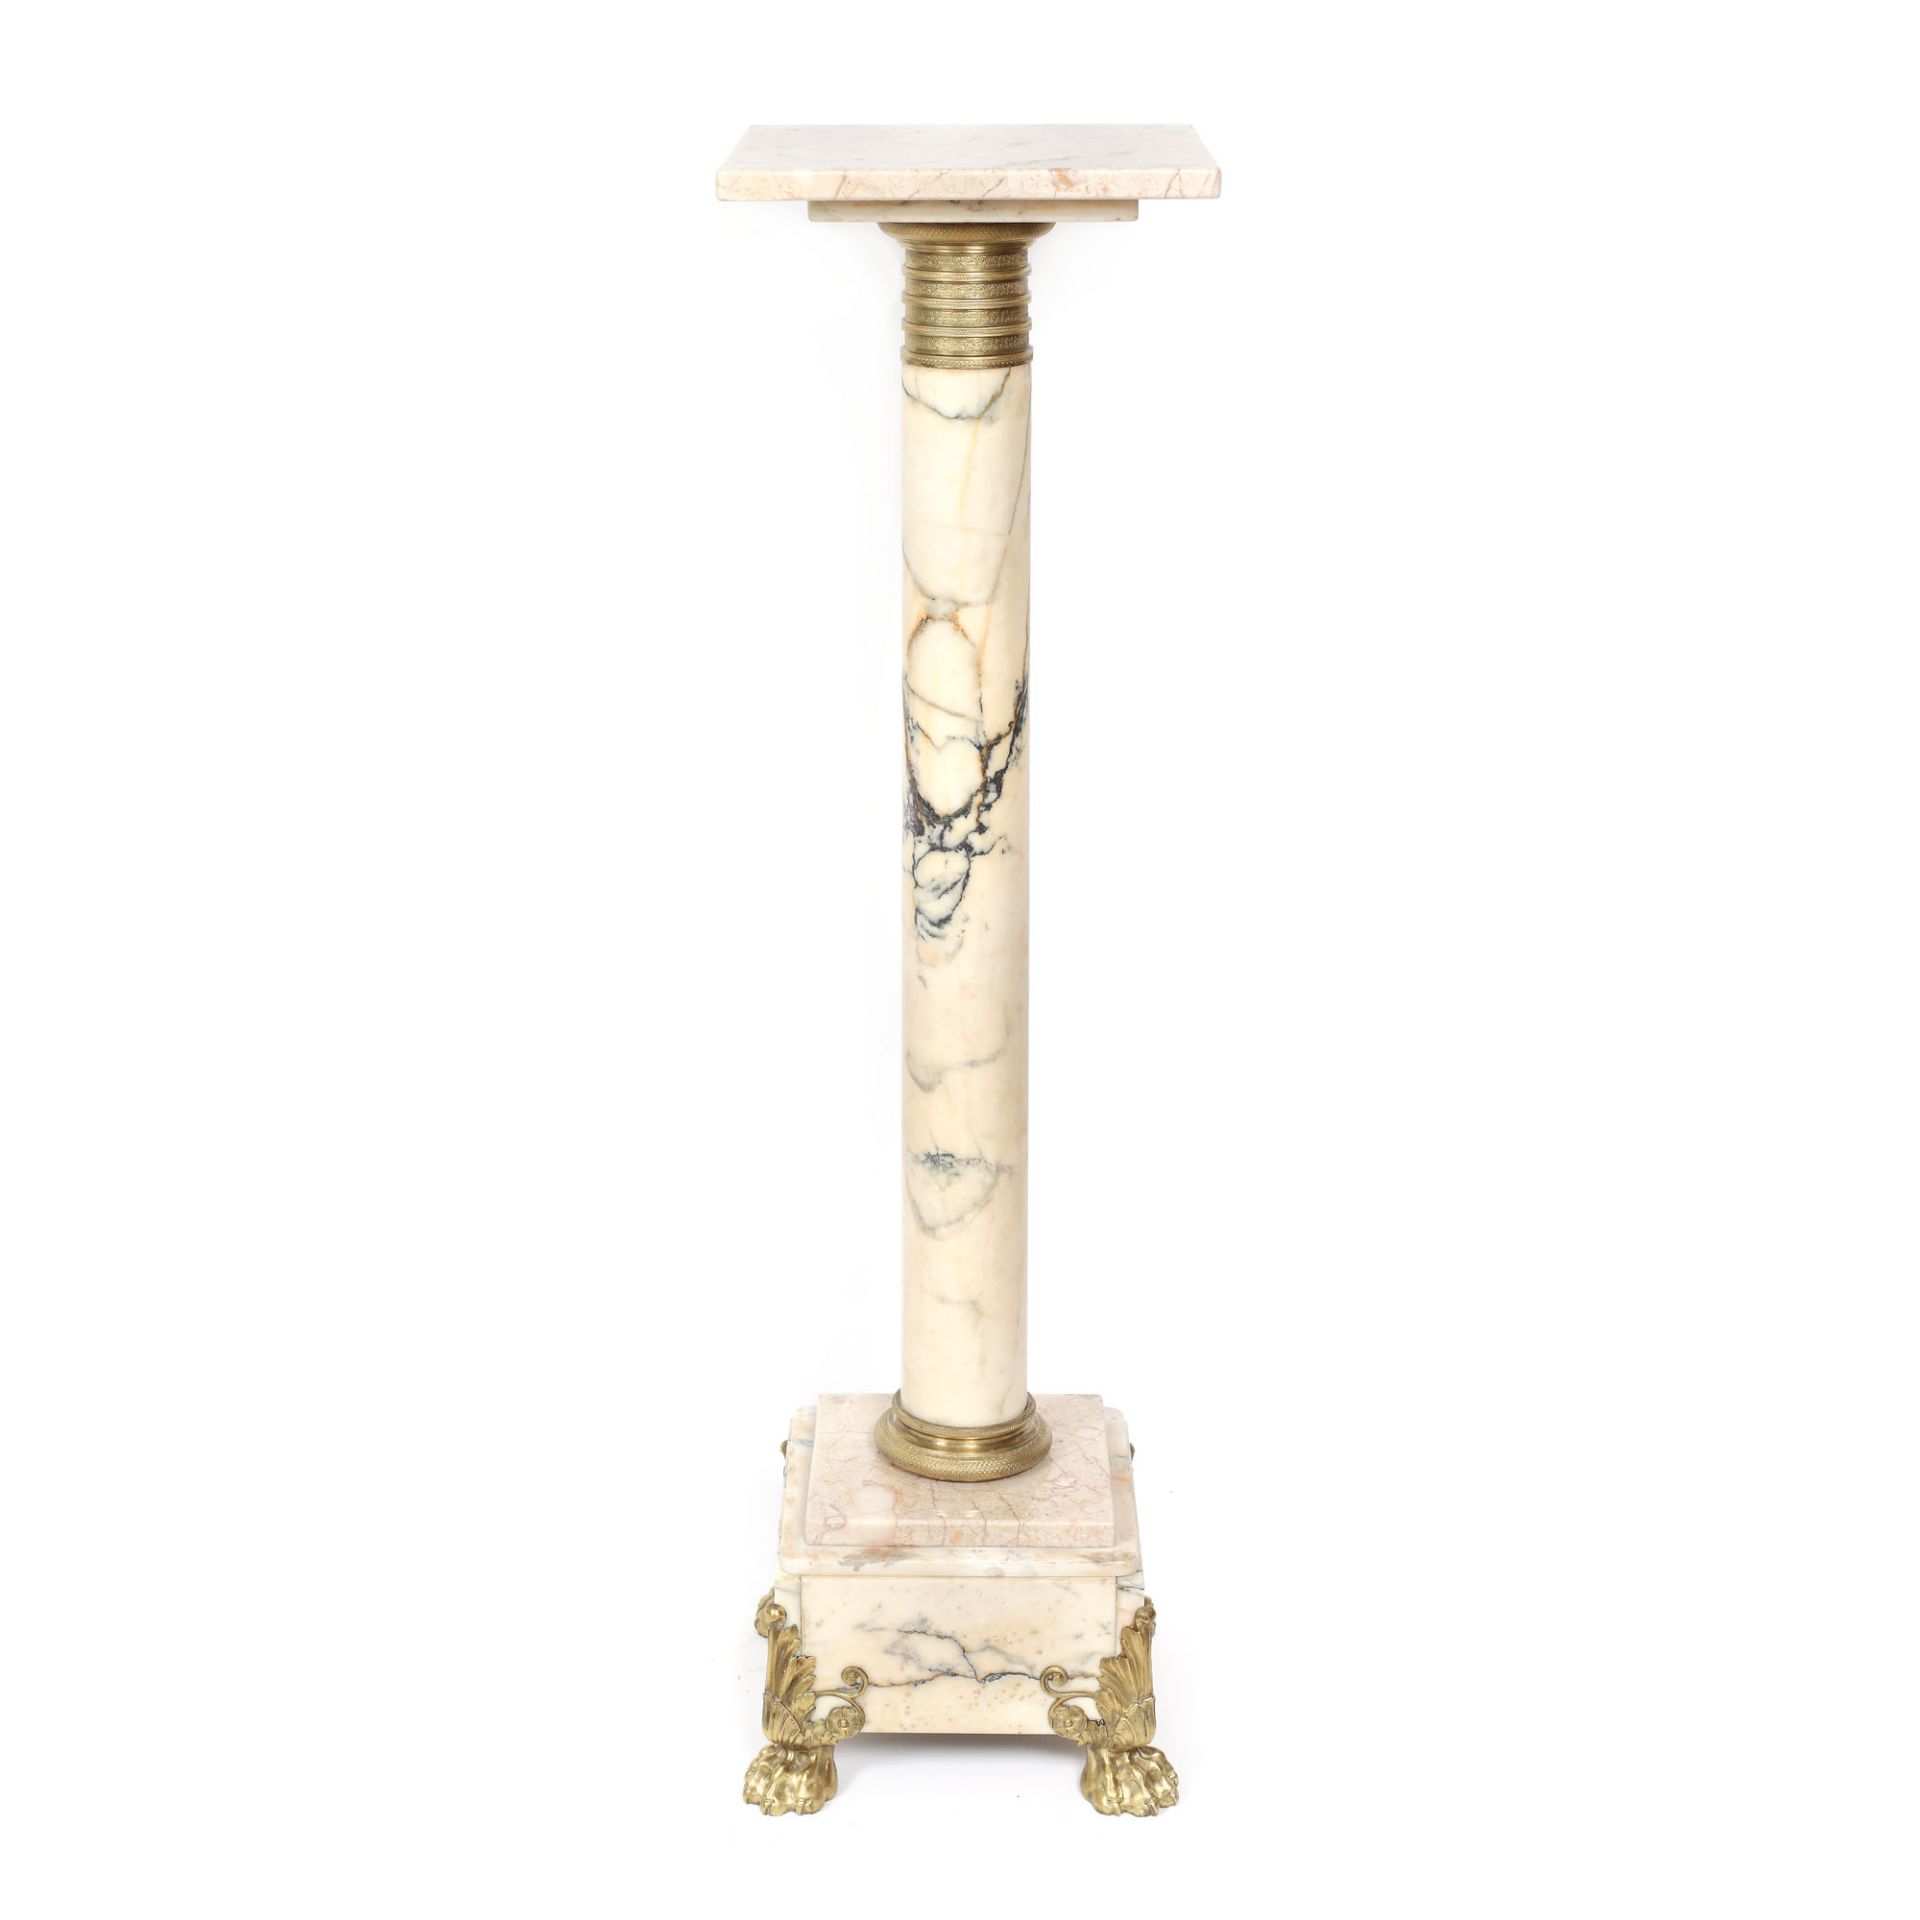 French workshop, Pedestal in white marble and doré bronze, late 19th century